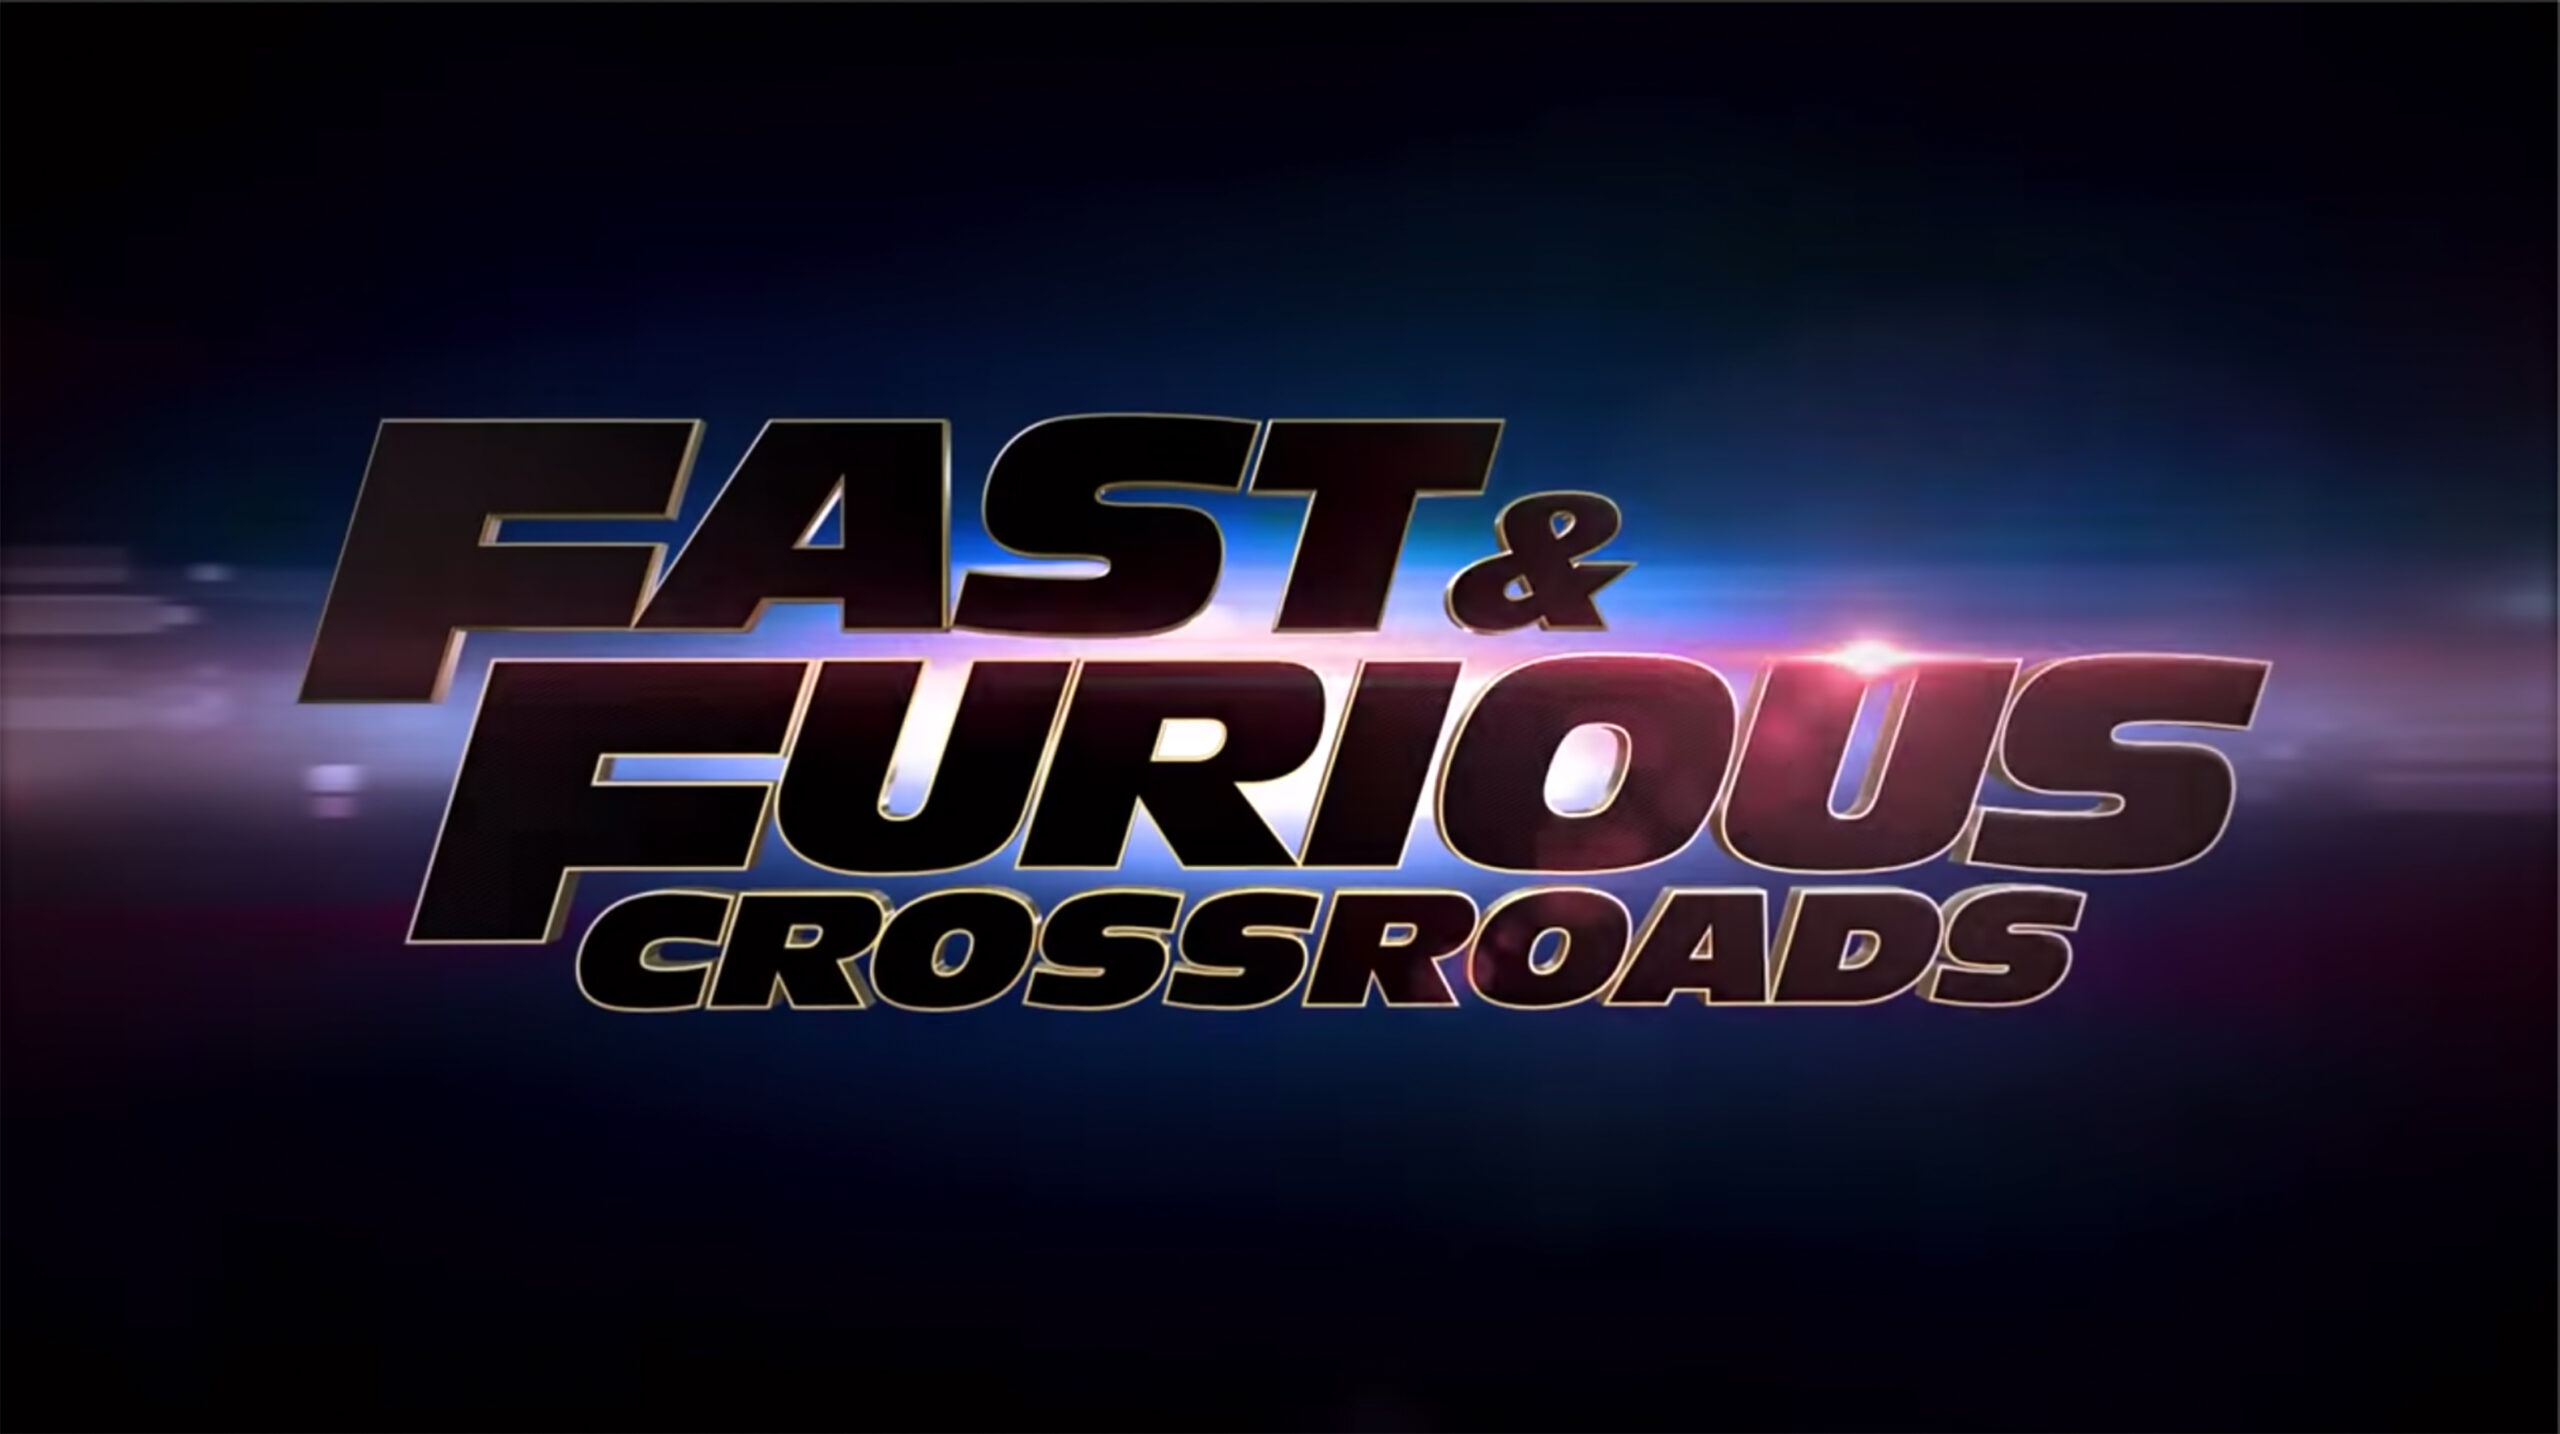 https://cdn.mobilesyrup.com/wp-content/uploads/2020/05/Fast-and-Furious-Crossroads-scaled.jpg